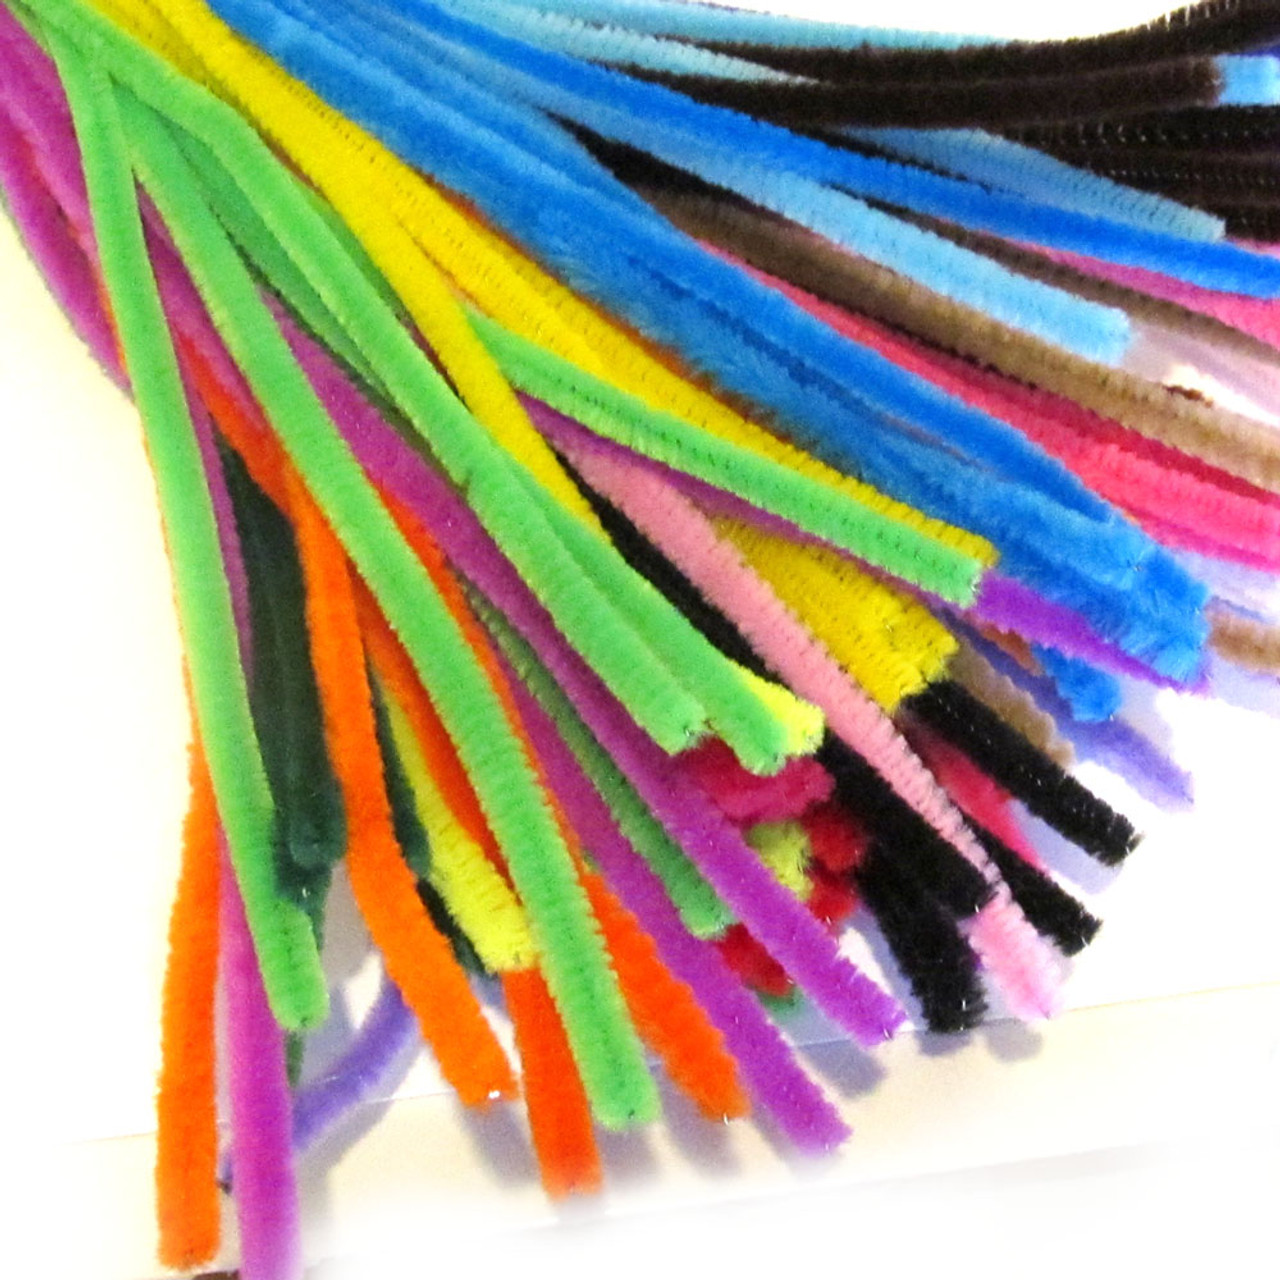 30CM/12Inch Pipe Cleaners, 300 Pack Flexible Chenille Stems, Light Green